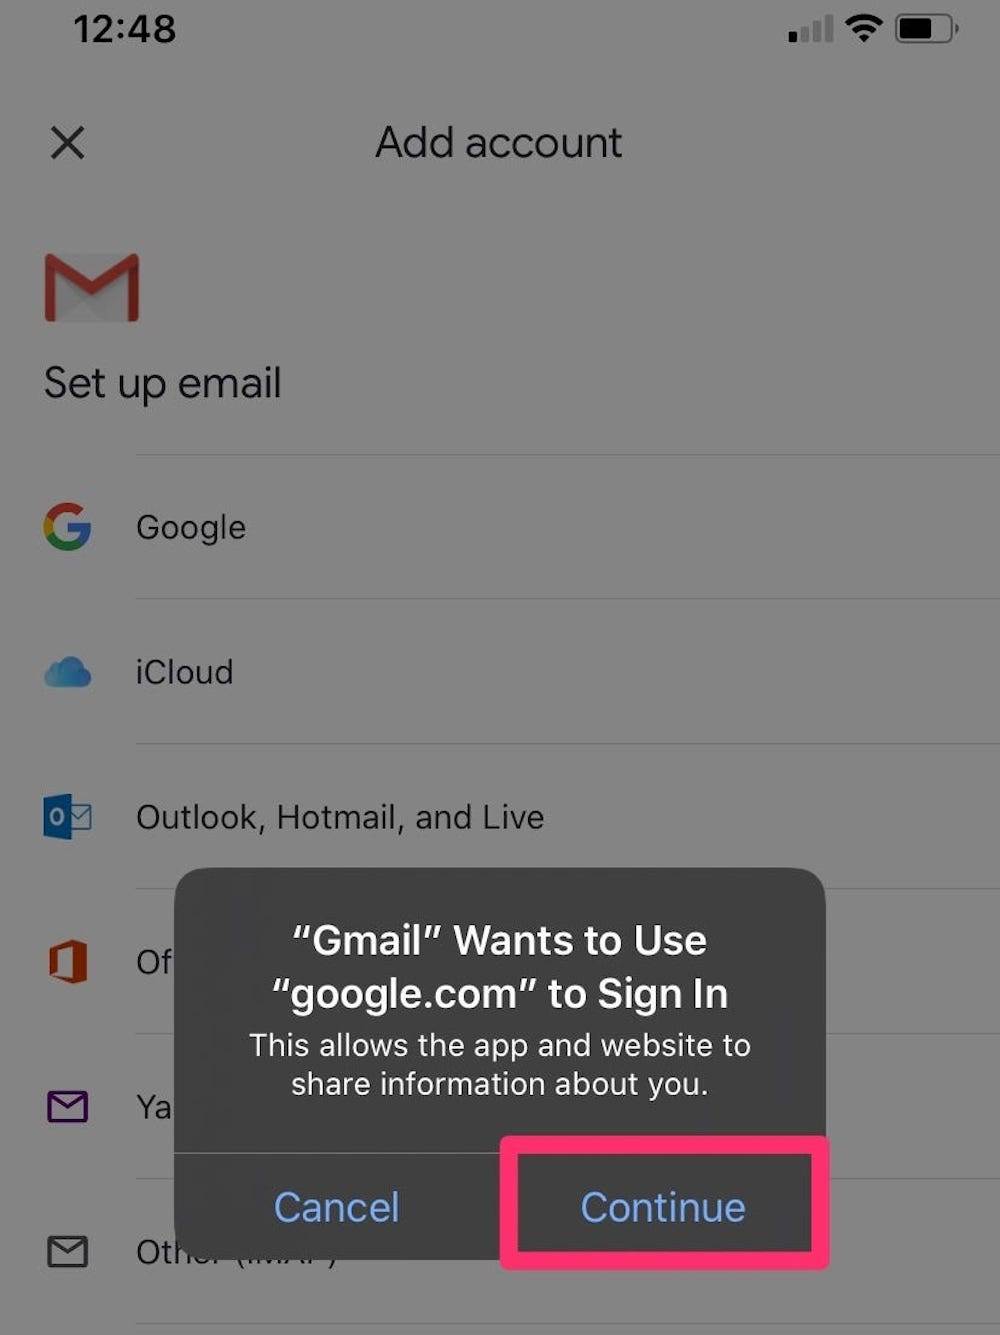 embed video into gMail email